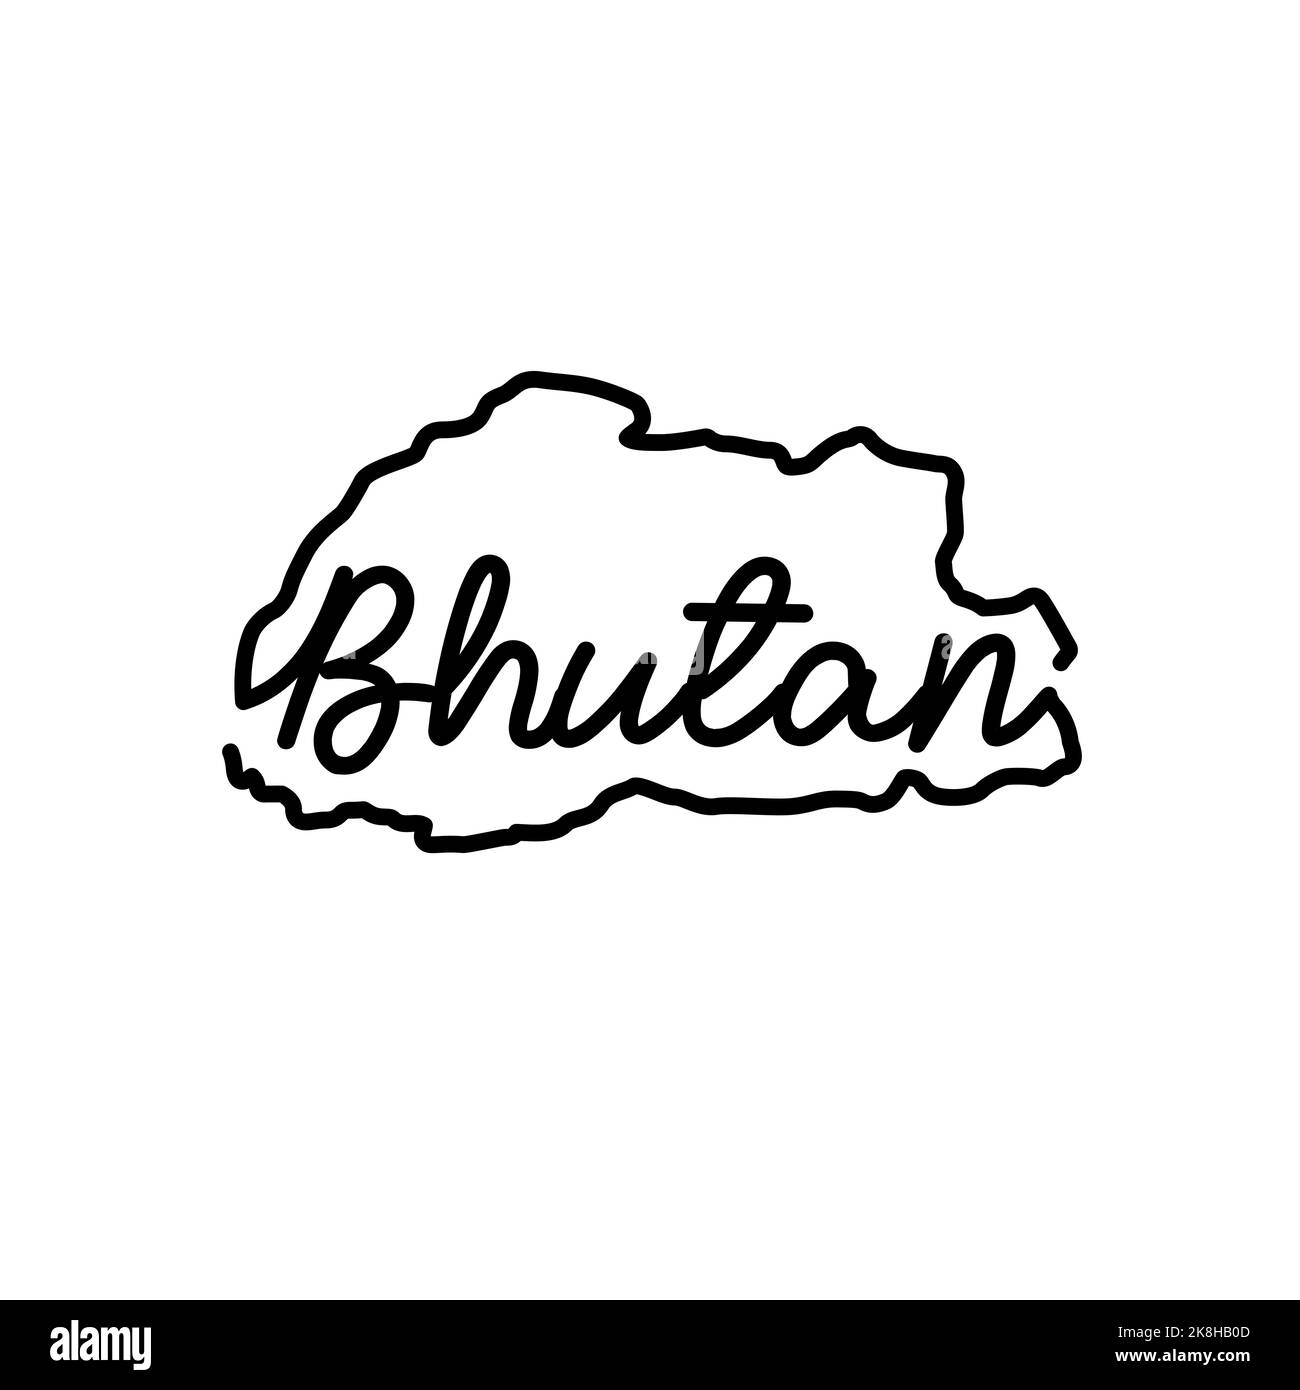 Bhutan outline map with the handwritten country name. Continuous line drawing of patriotic home sign. A love for a small homeland. T-shirt print idea. Stock Photo